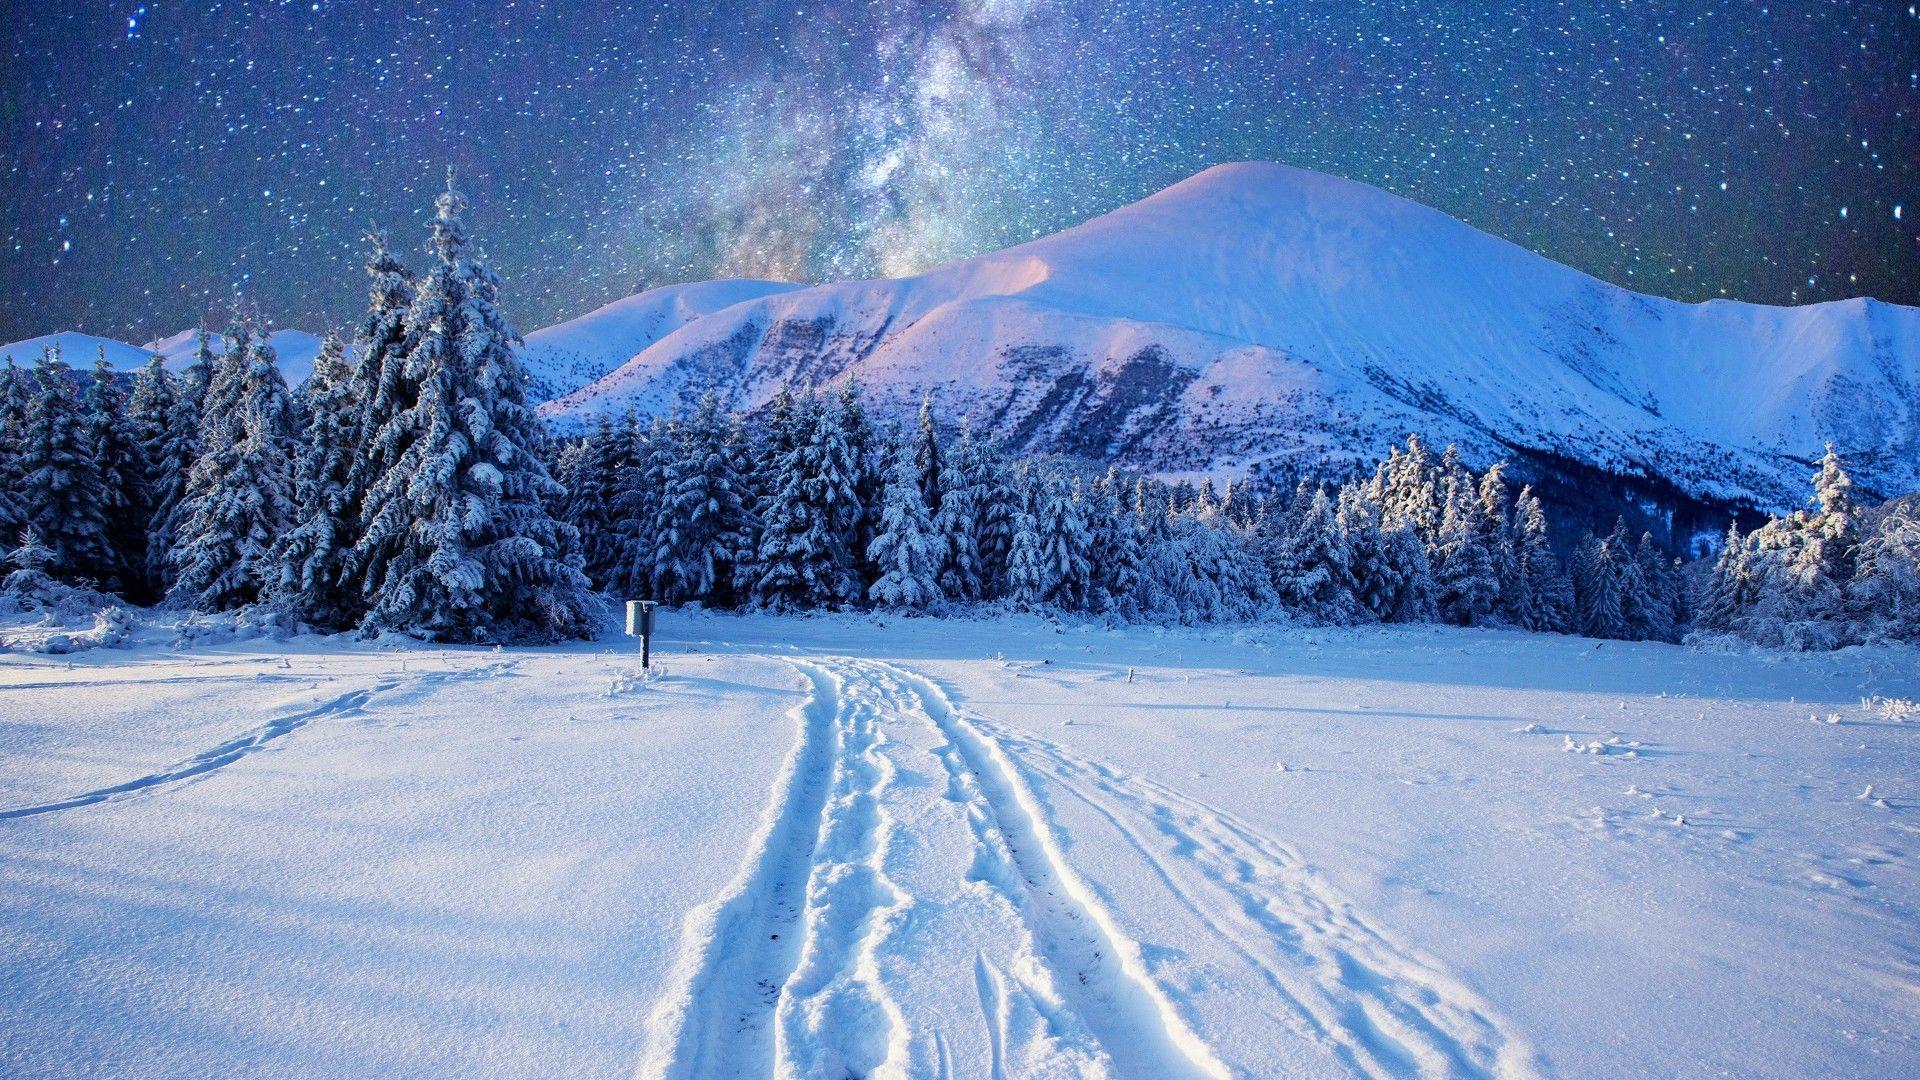 Milky Way On The Night Sky Over The Snowy Mountains Wallpaper